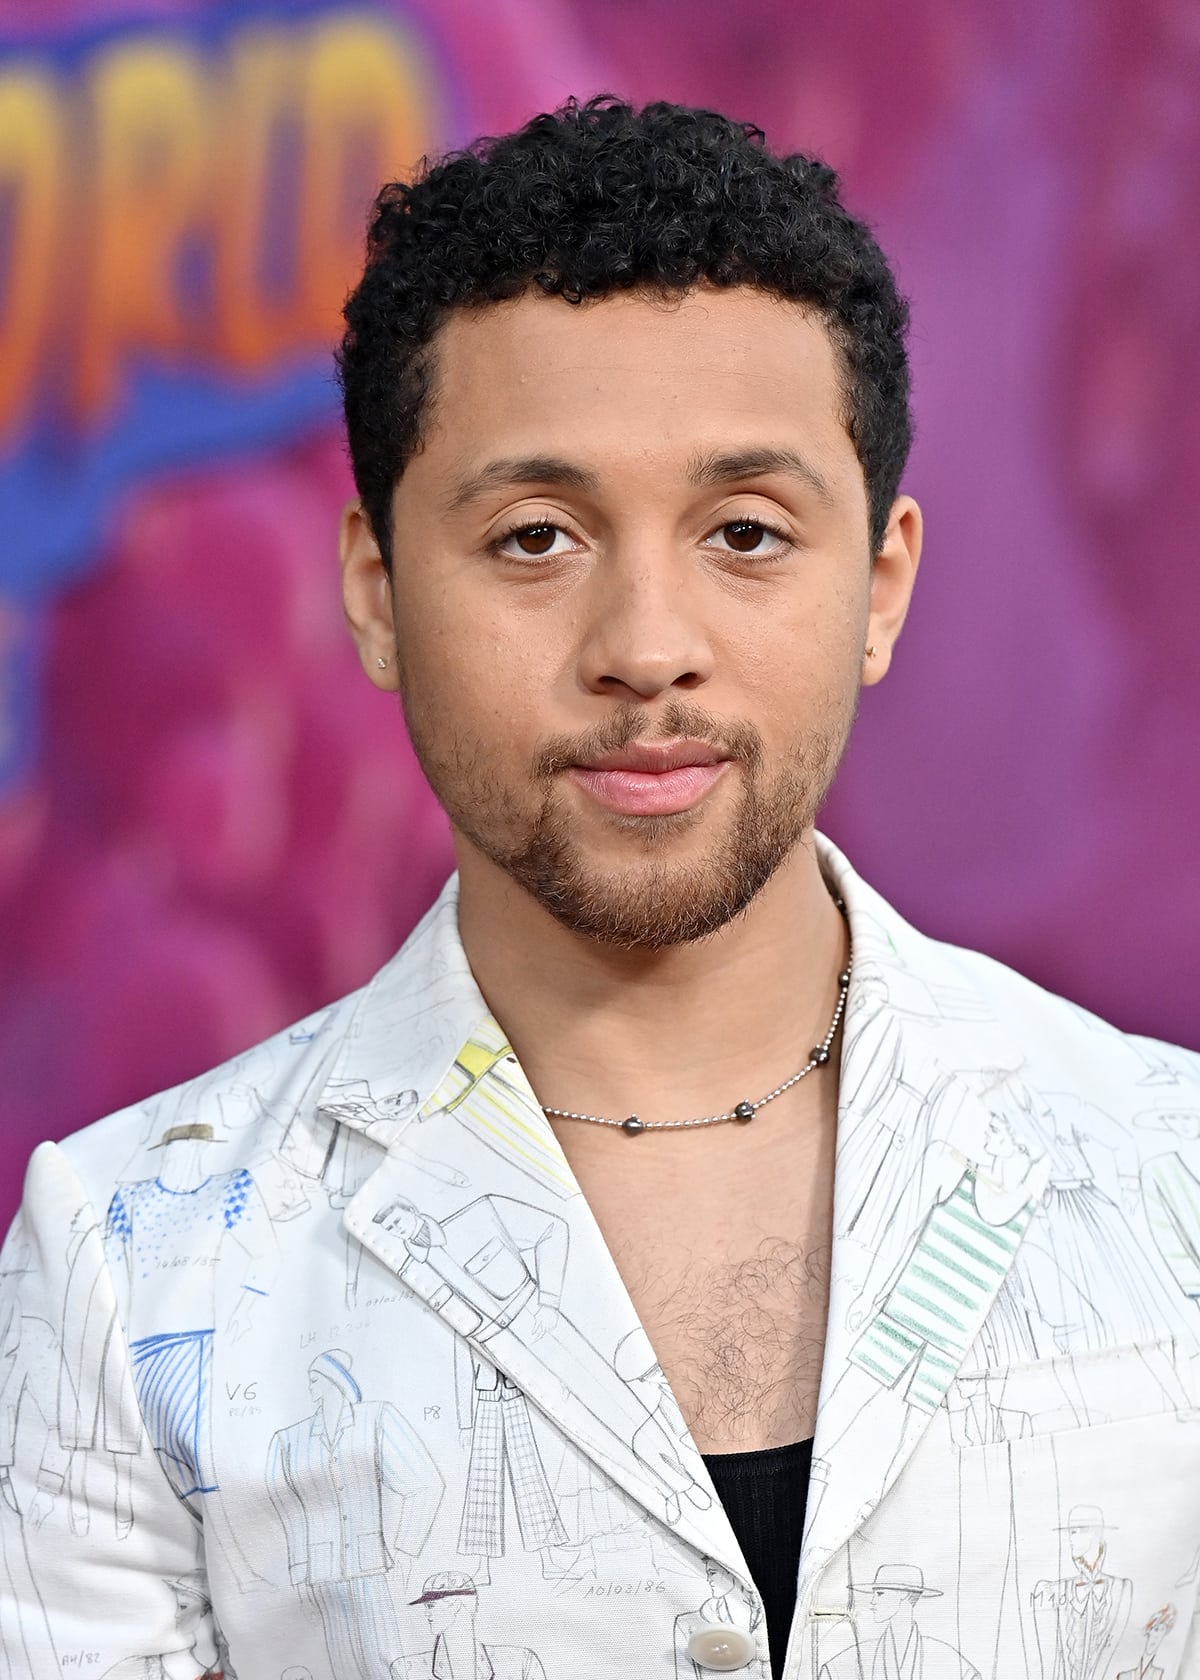 Openly gay actor Jaboukie Young-White says Strange World is not "a coming out story" for his character Ethan Clade